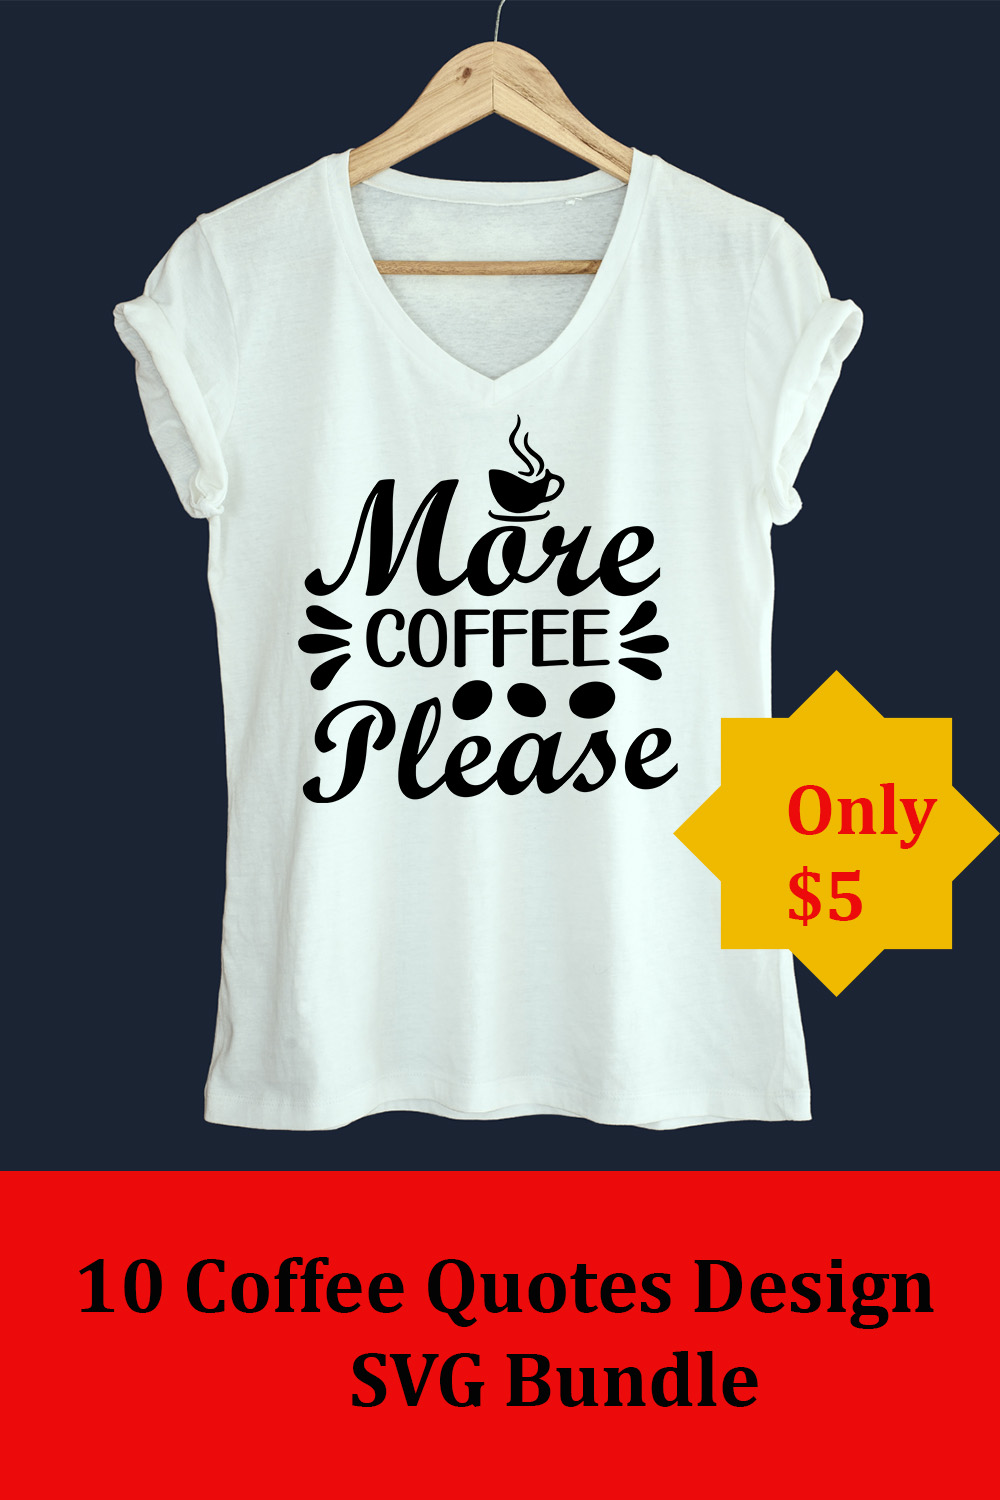 Image of a white t-shirt with a charming inscription More coffee please